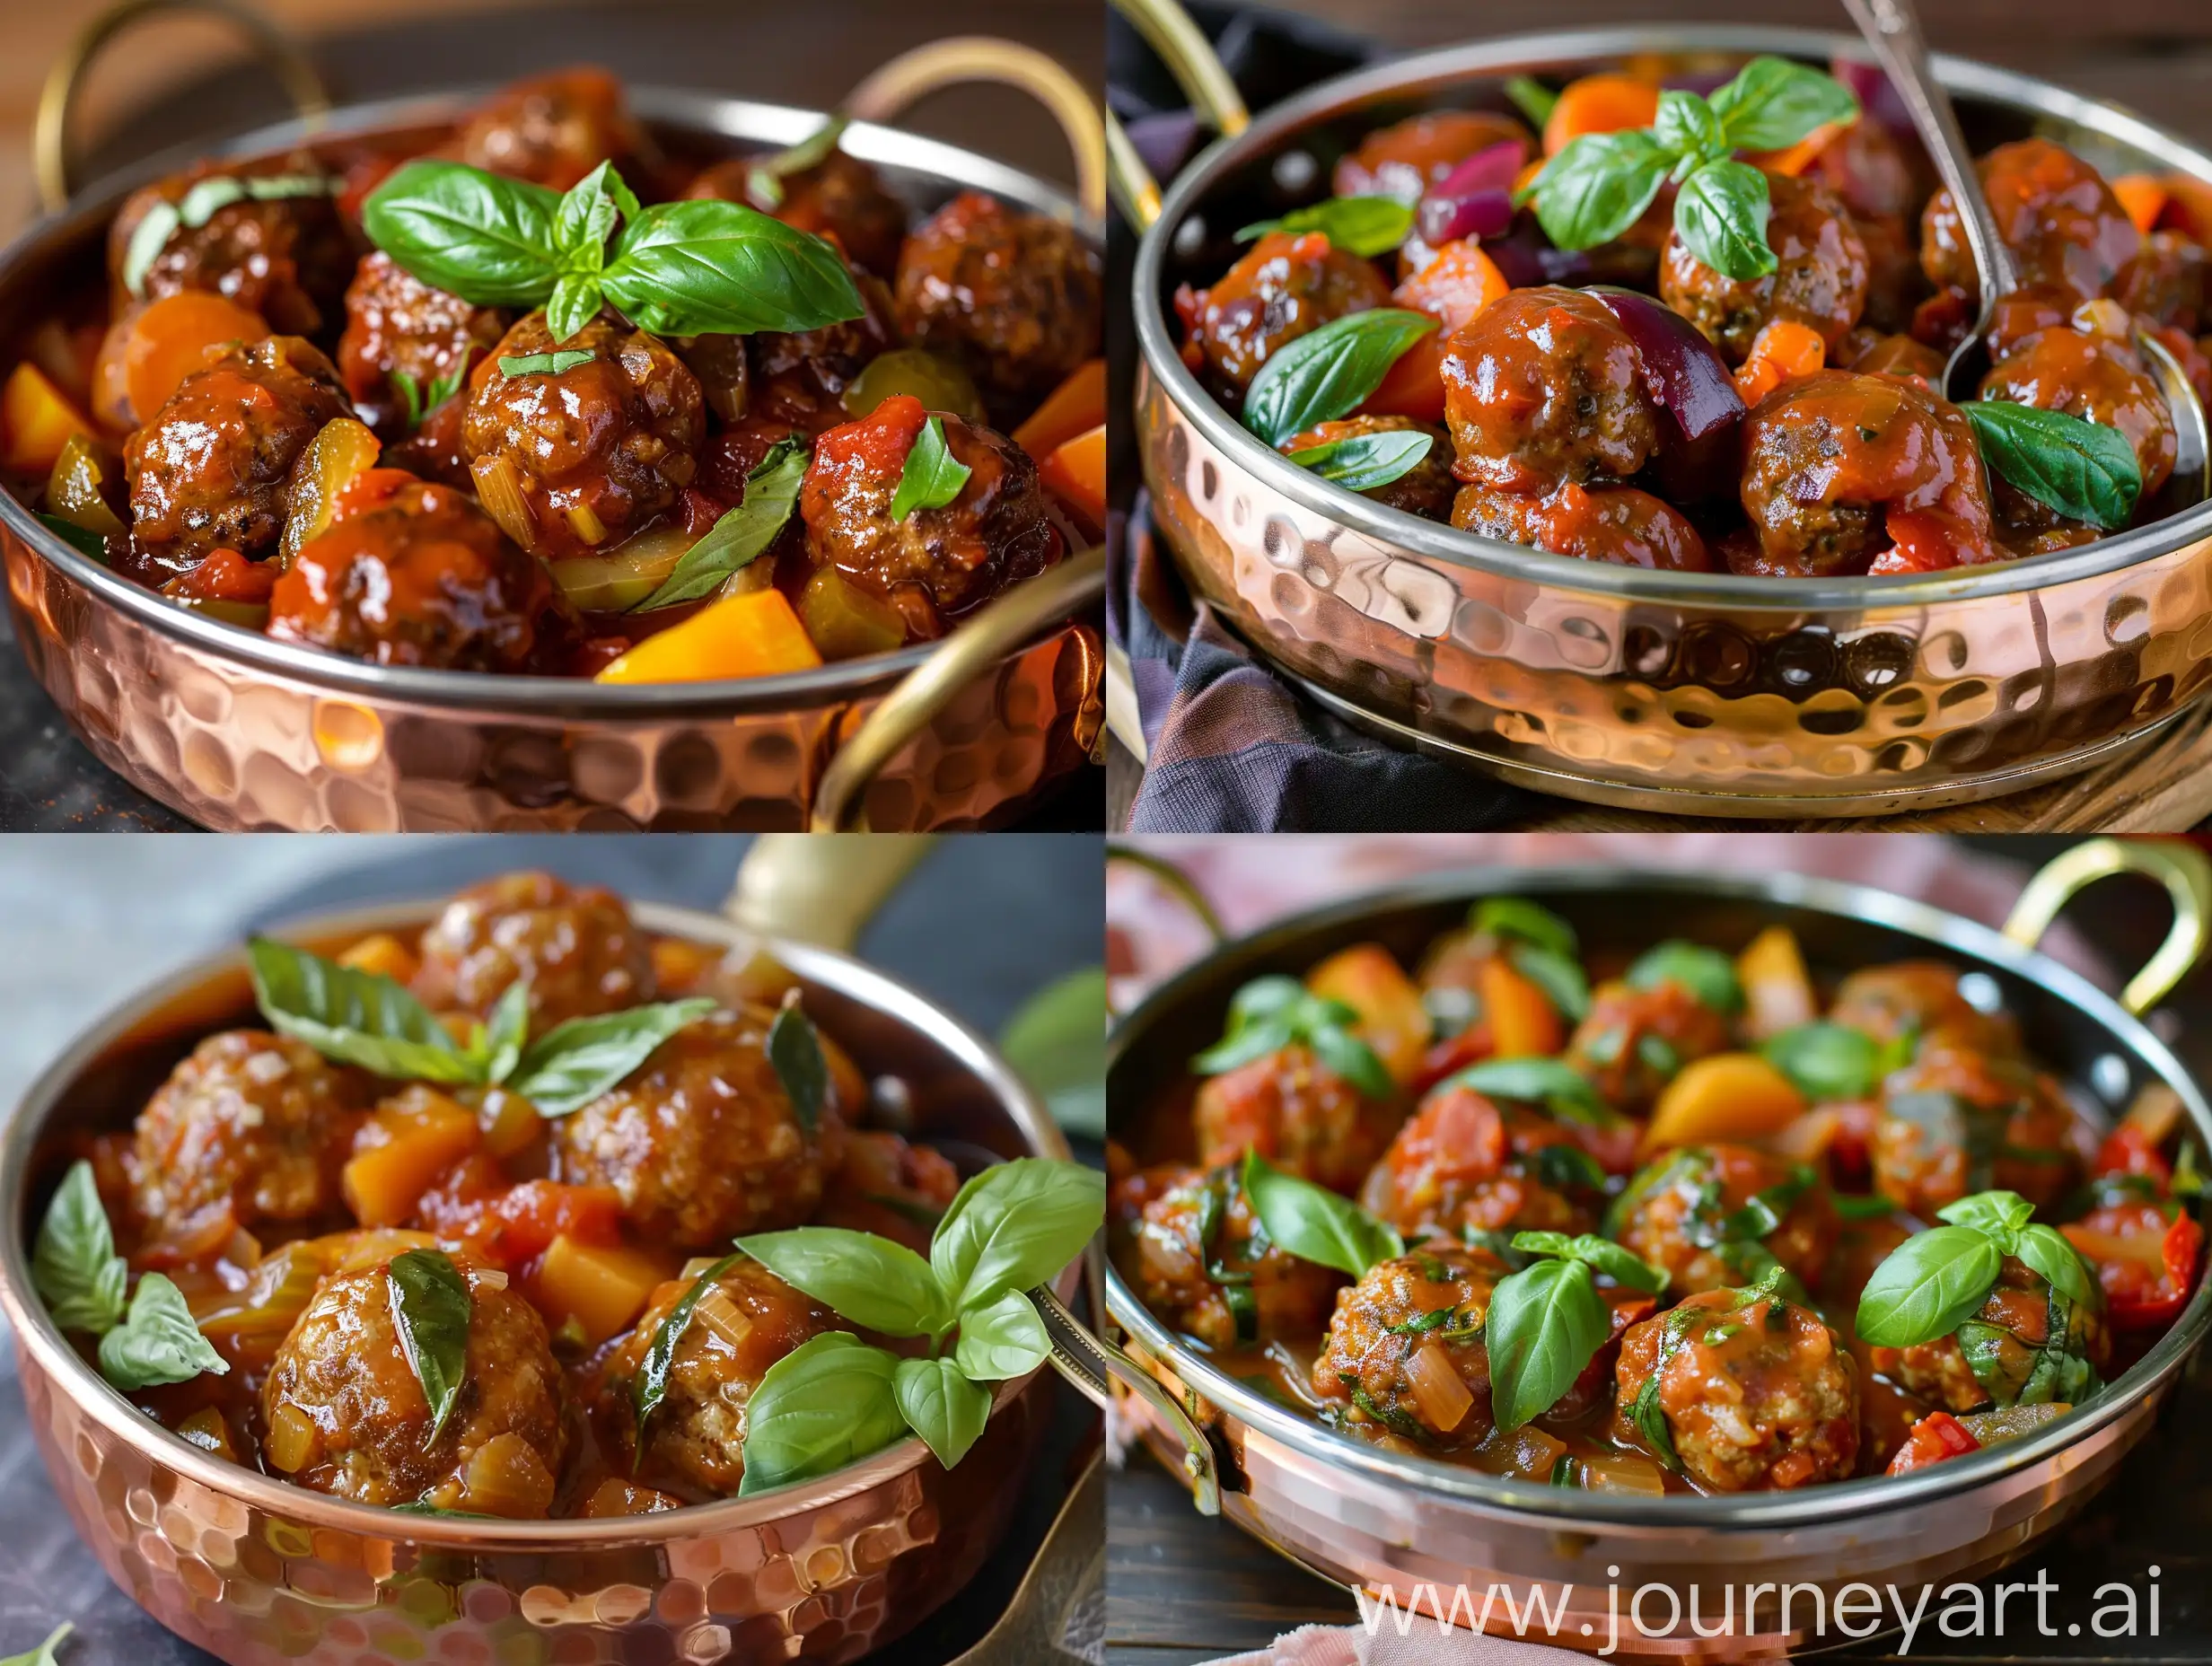 Savory-Sour-Meatballs-in-Tomato-Sauce-with-Basil-and-Vegetables